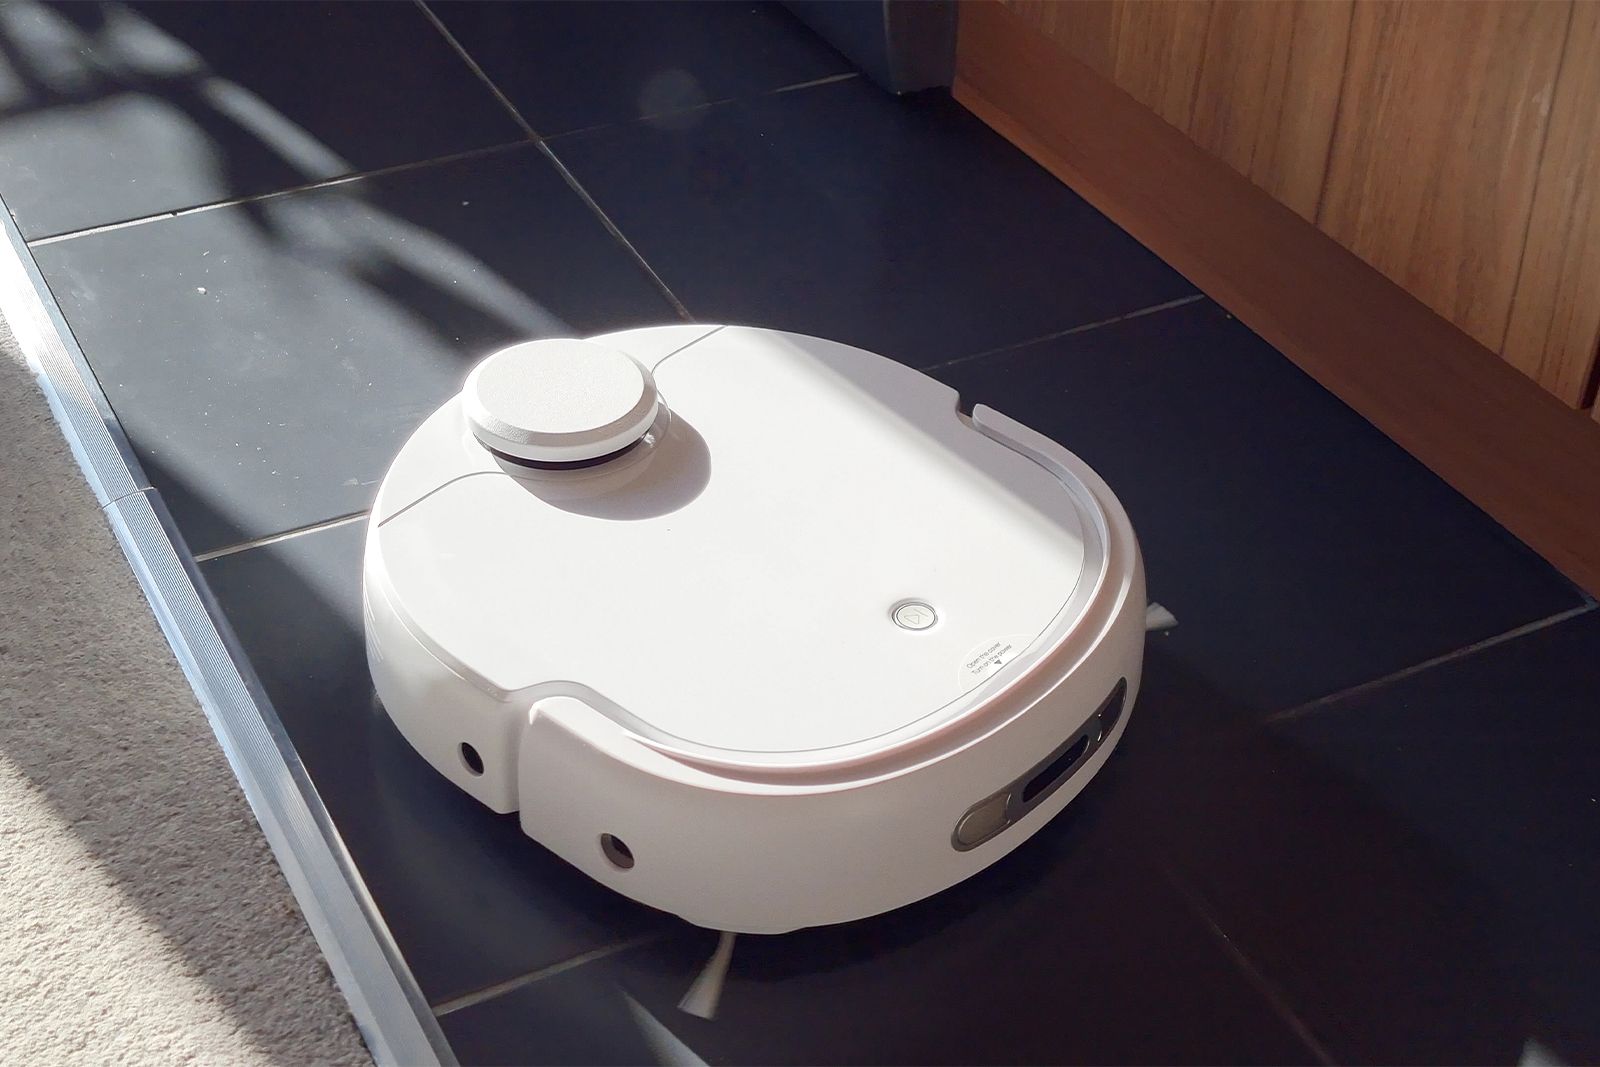 Narwal's superb T10 robot vacuum will keep your home sparkling clean photo 6